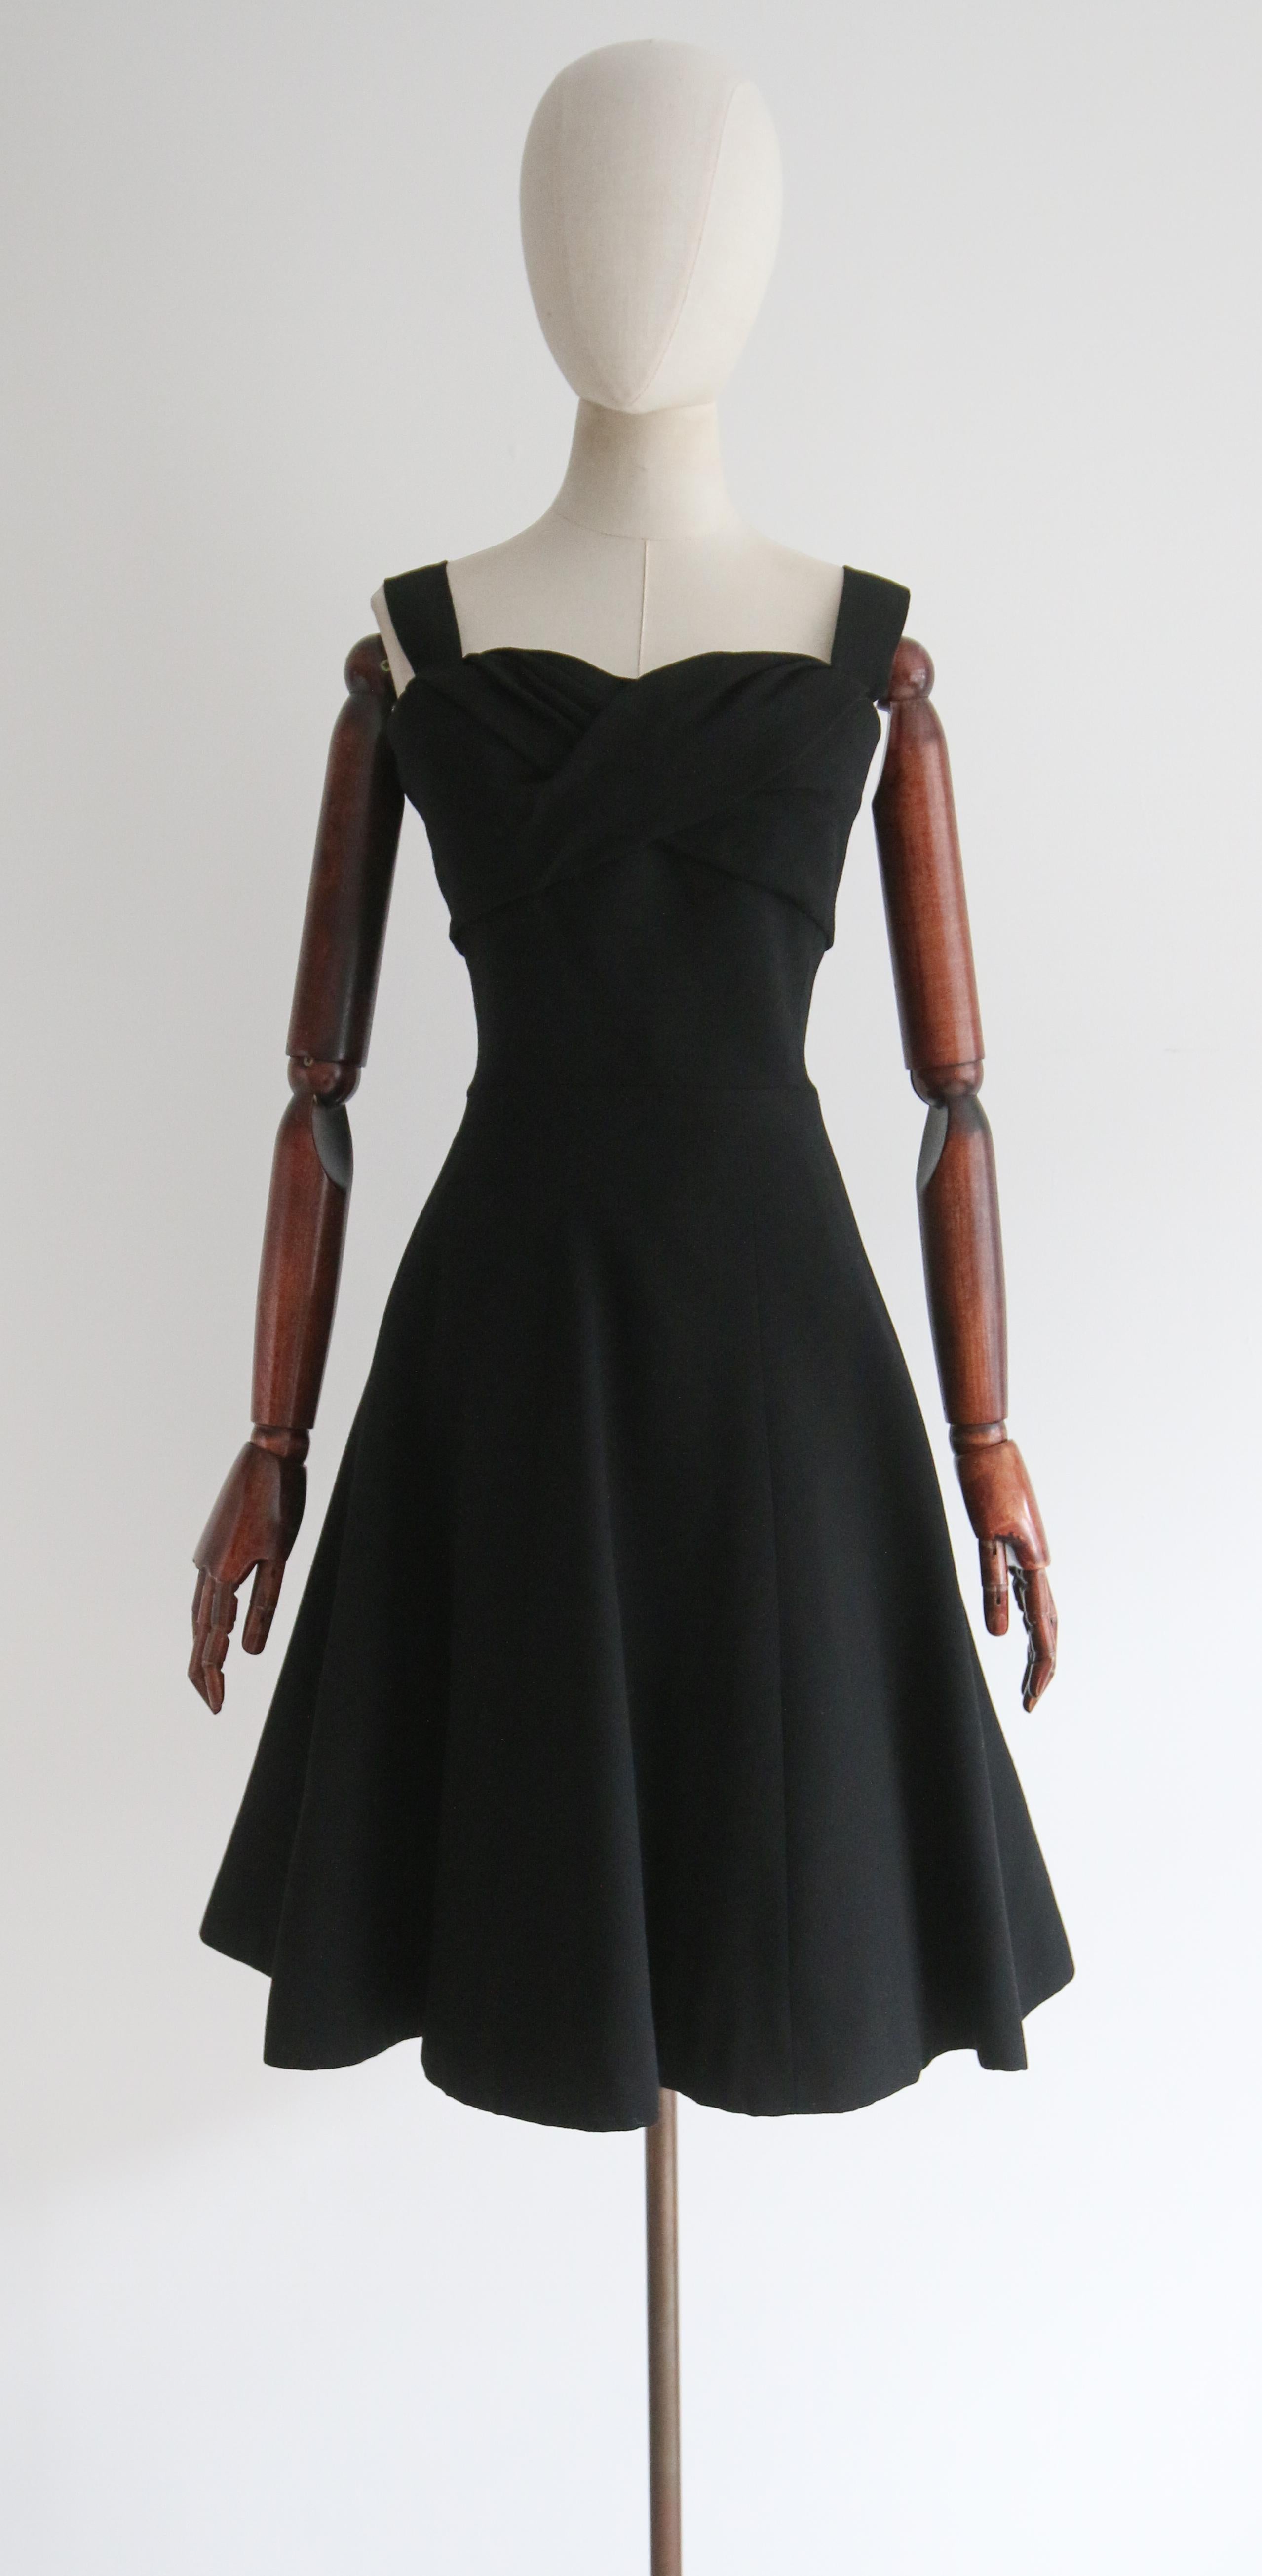 This collectible and rare late 1950's Christian Dior dress, rendered in a deep black wool crepe, showcases the iconic silhouette of the era, whilst remaining to this day a classic and timeless design. 

The rounded sweetheart neckline is framed by